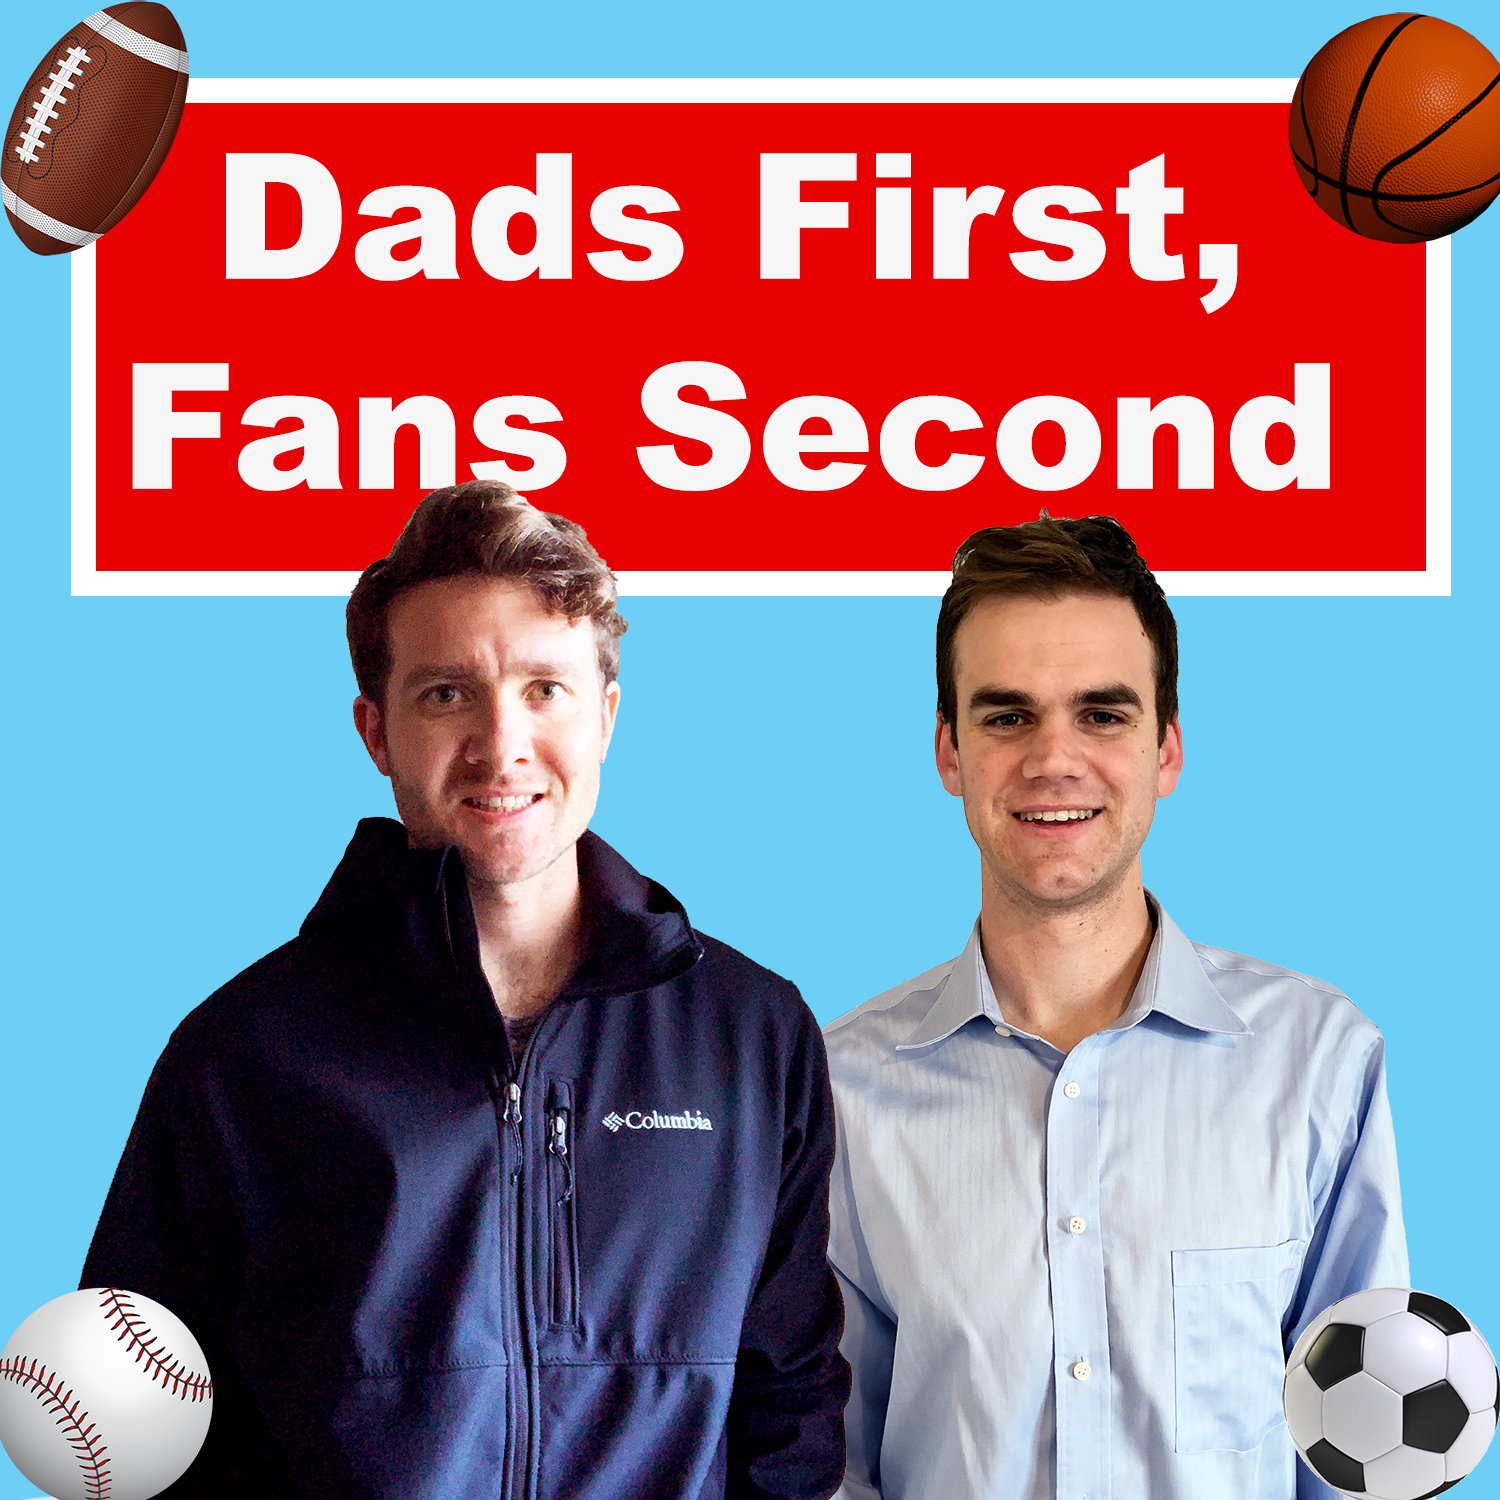 Dads First, Fans Second